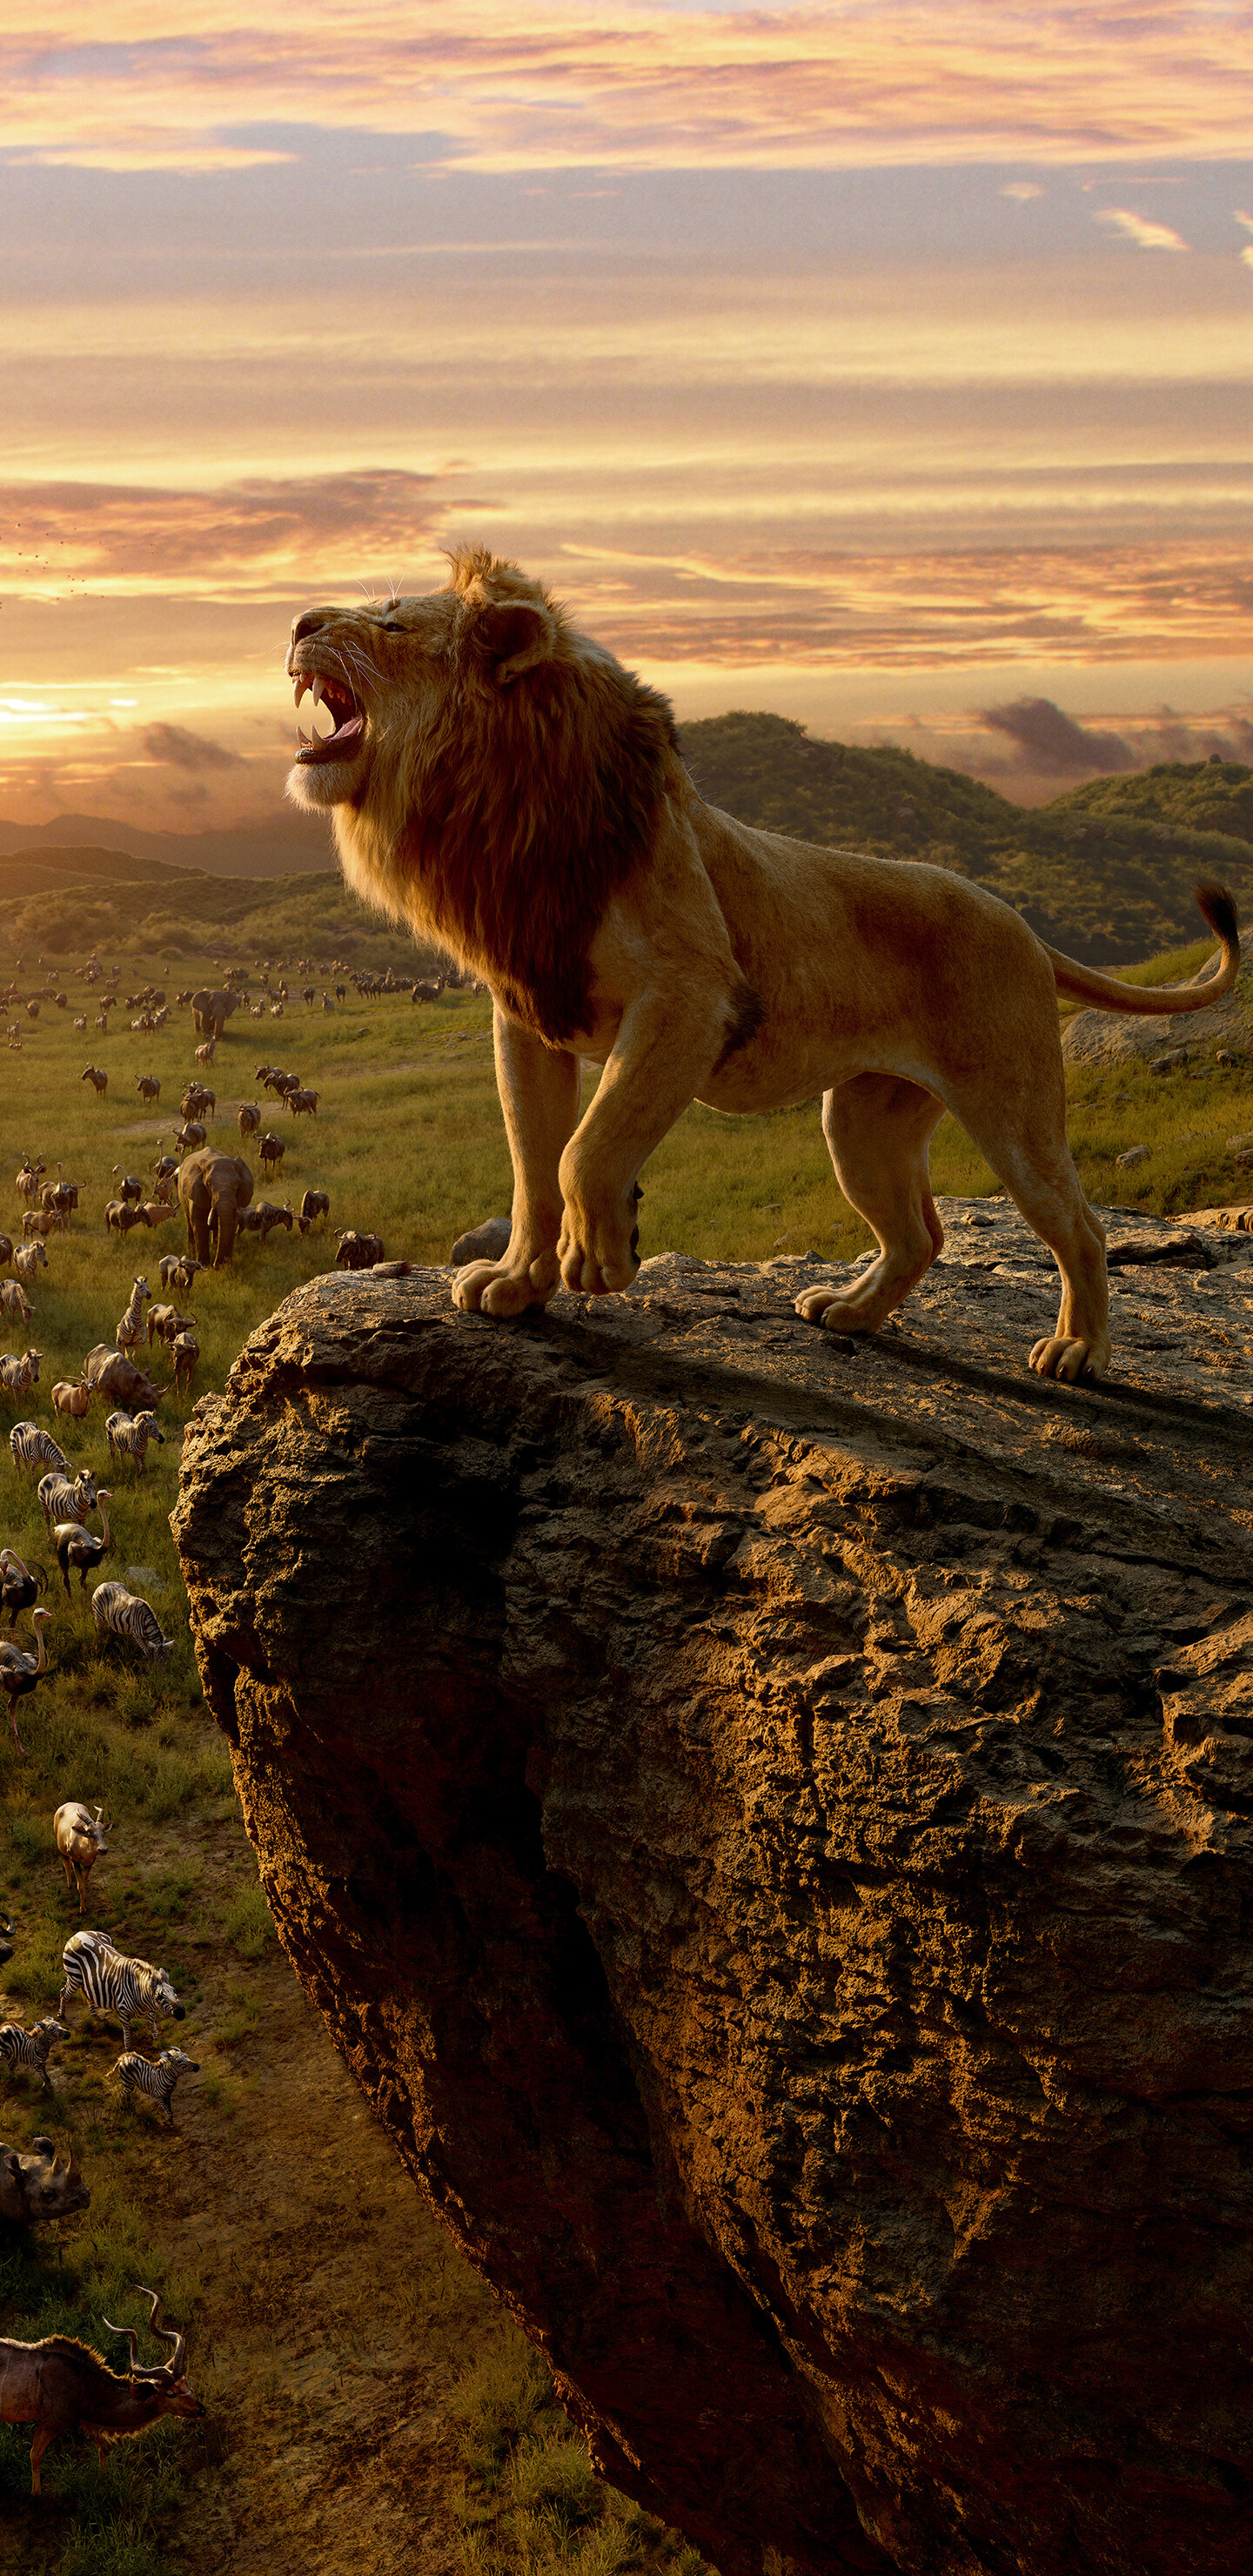 The Lion King, Movie wallpapers, Samsung Galaxy wallpapers, Background photos, 1440x2960 HD Phone